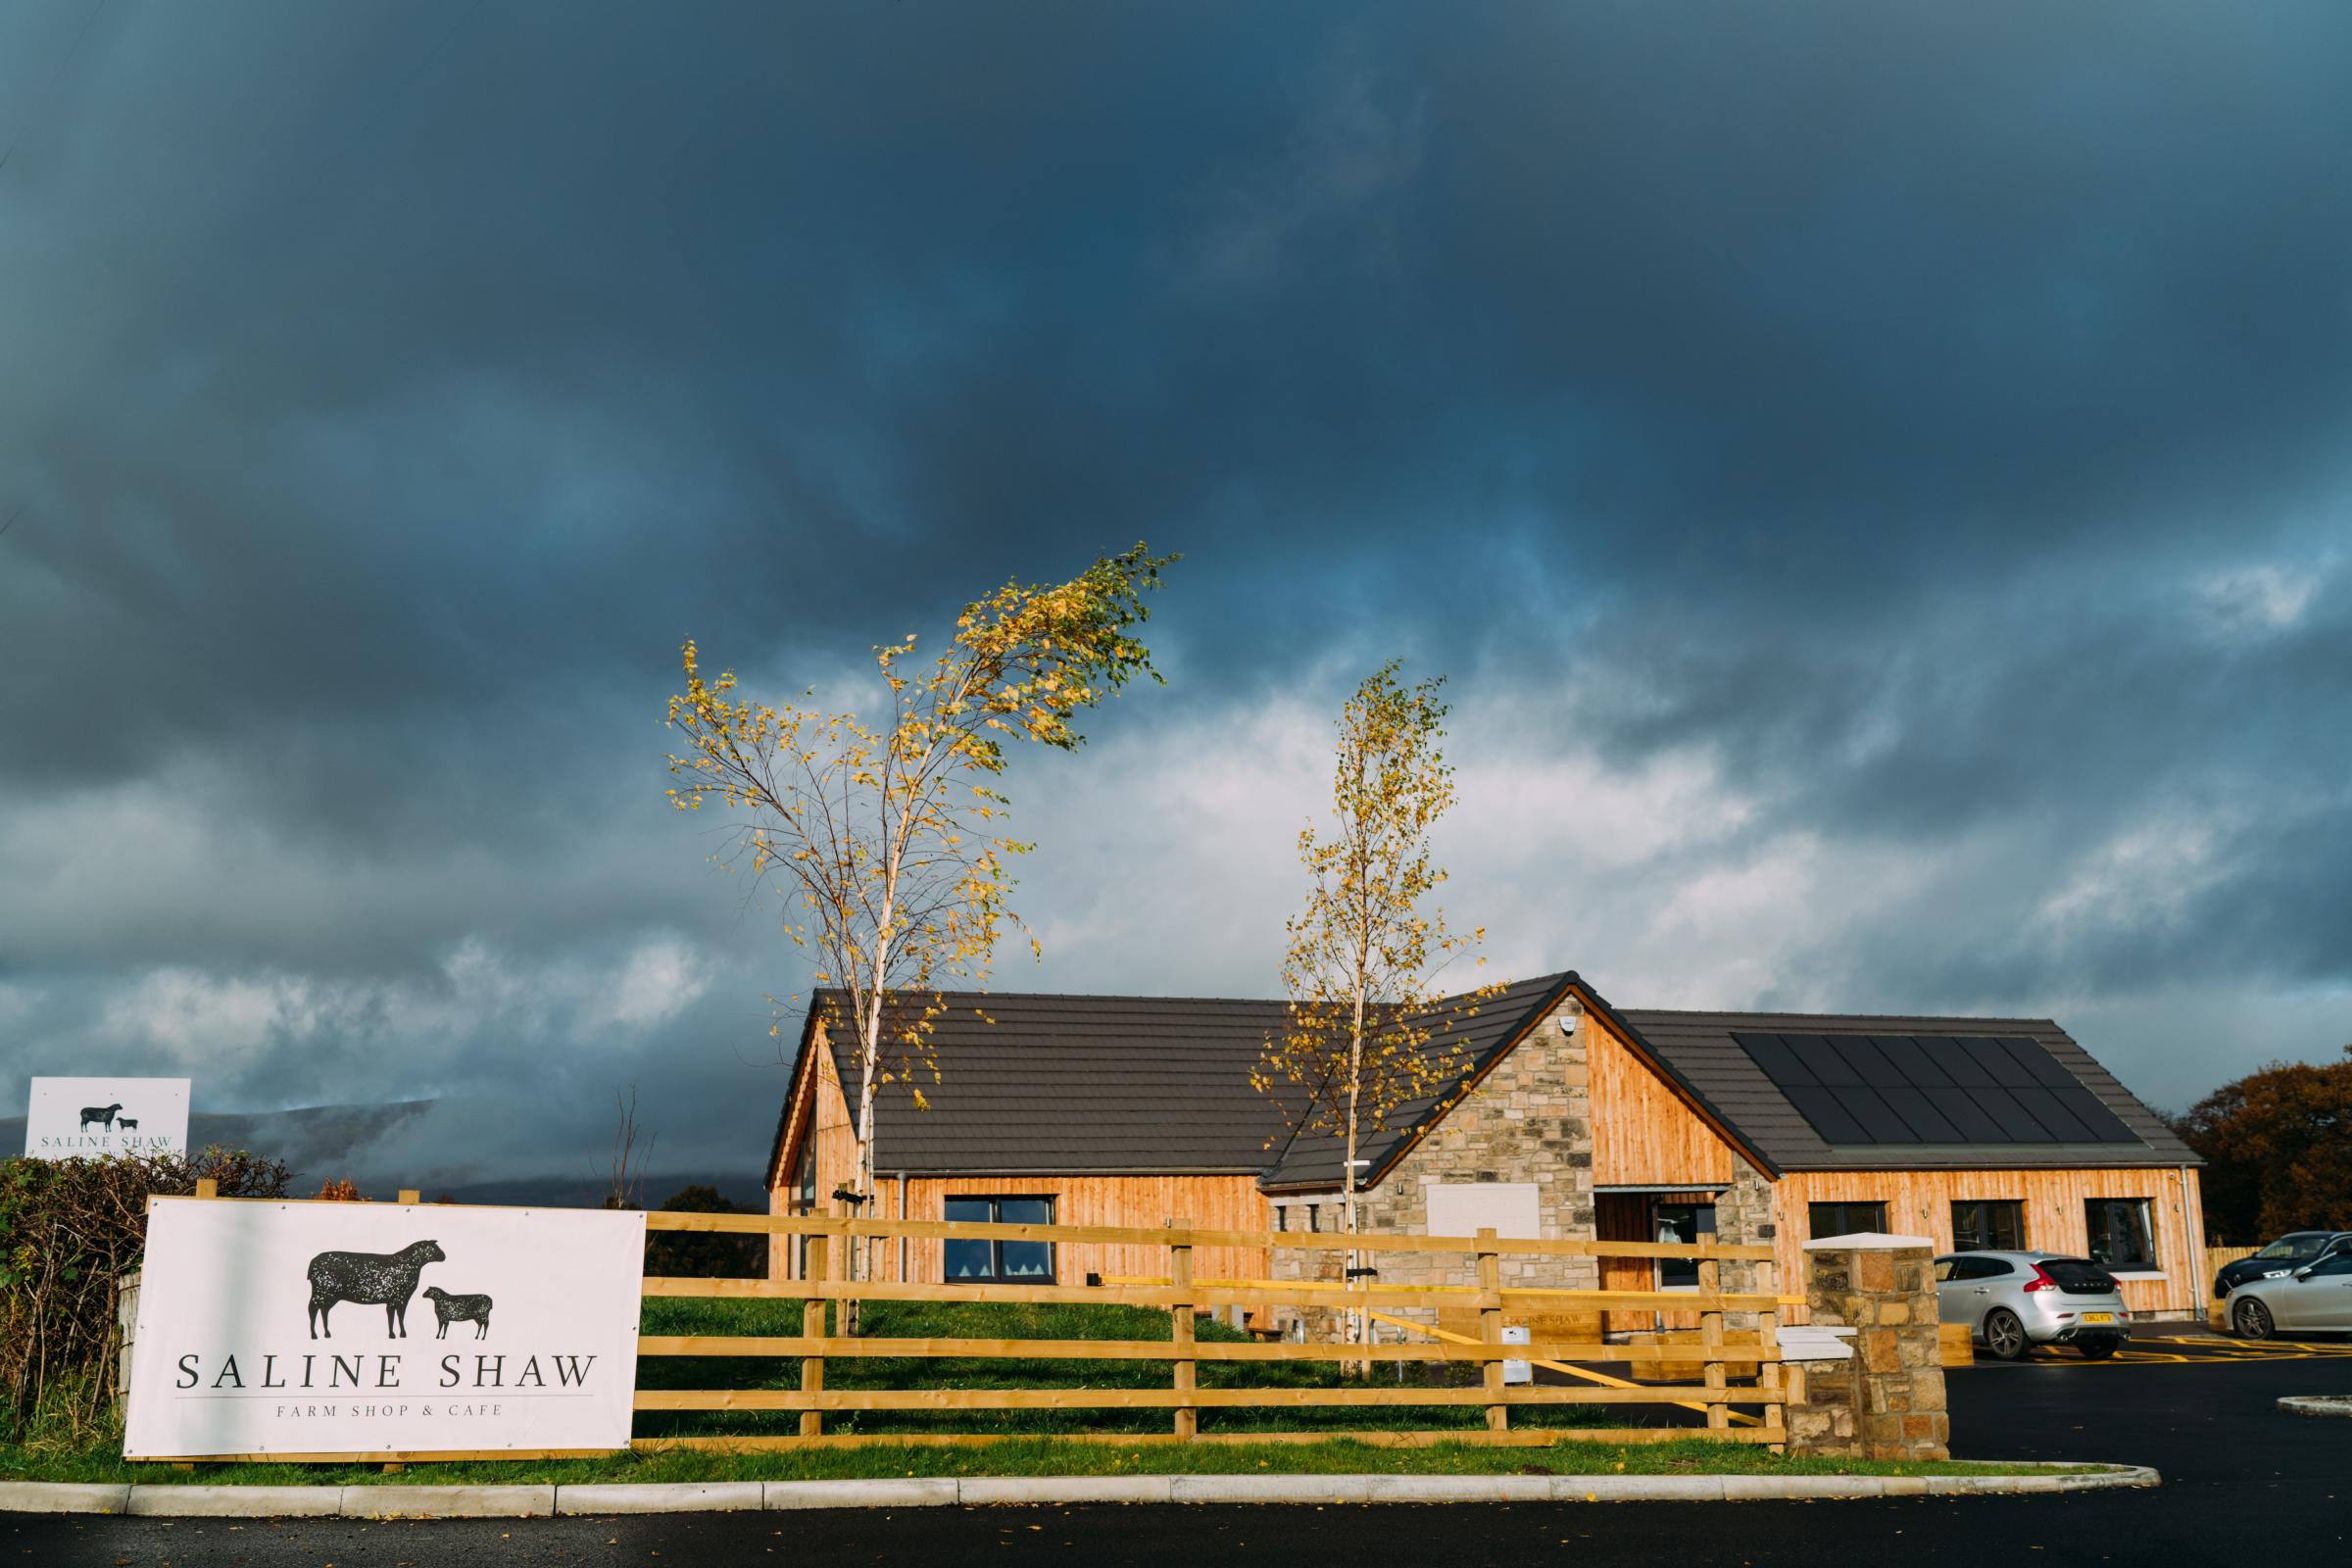 A welcome in off the road to the Saline Shaw Farm Shop and Cafe, with its Scandinavian building design